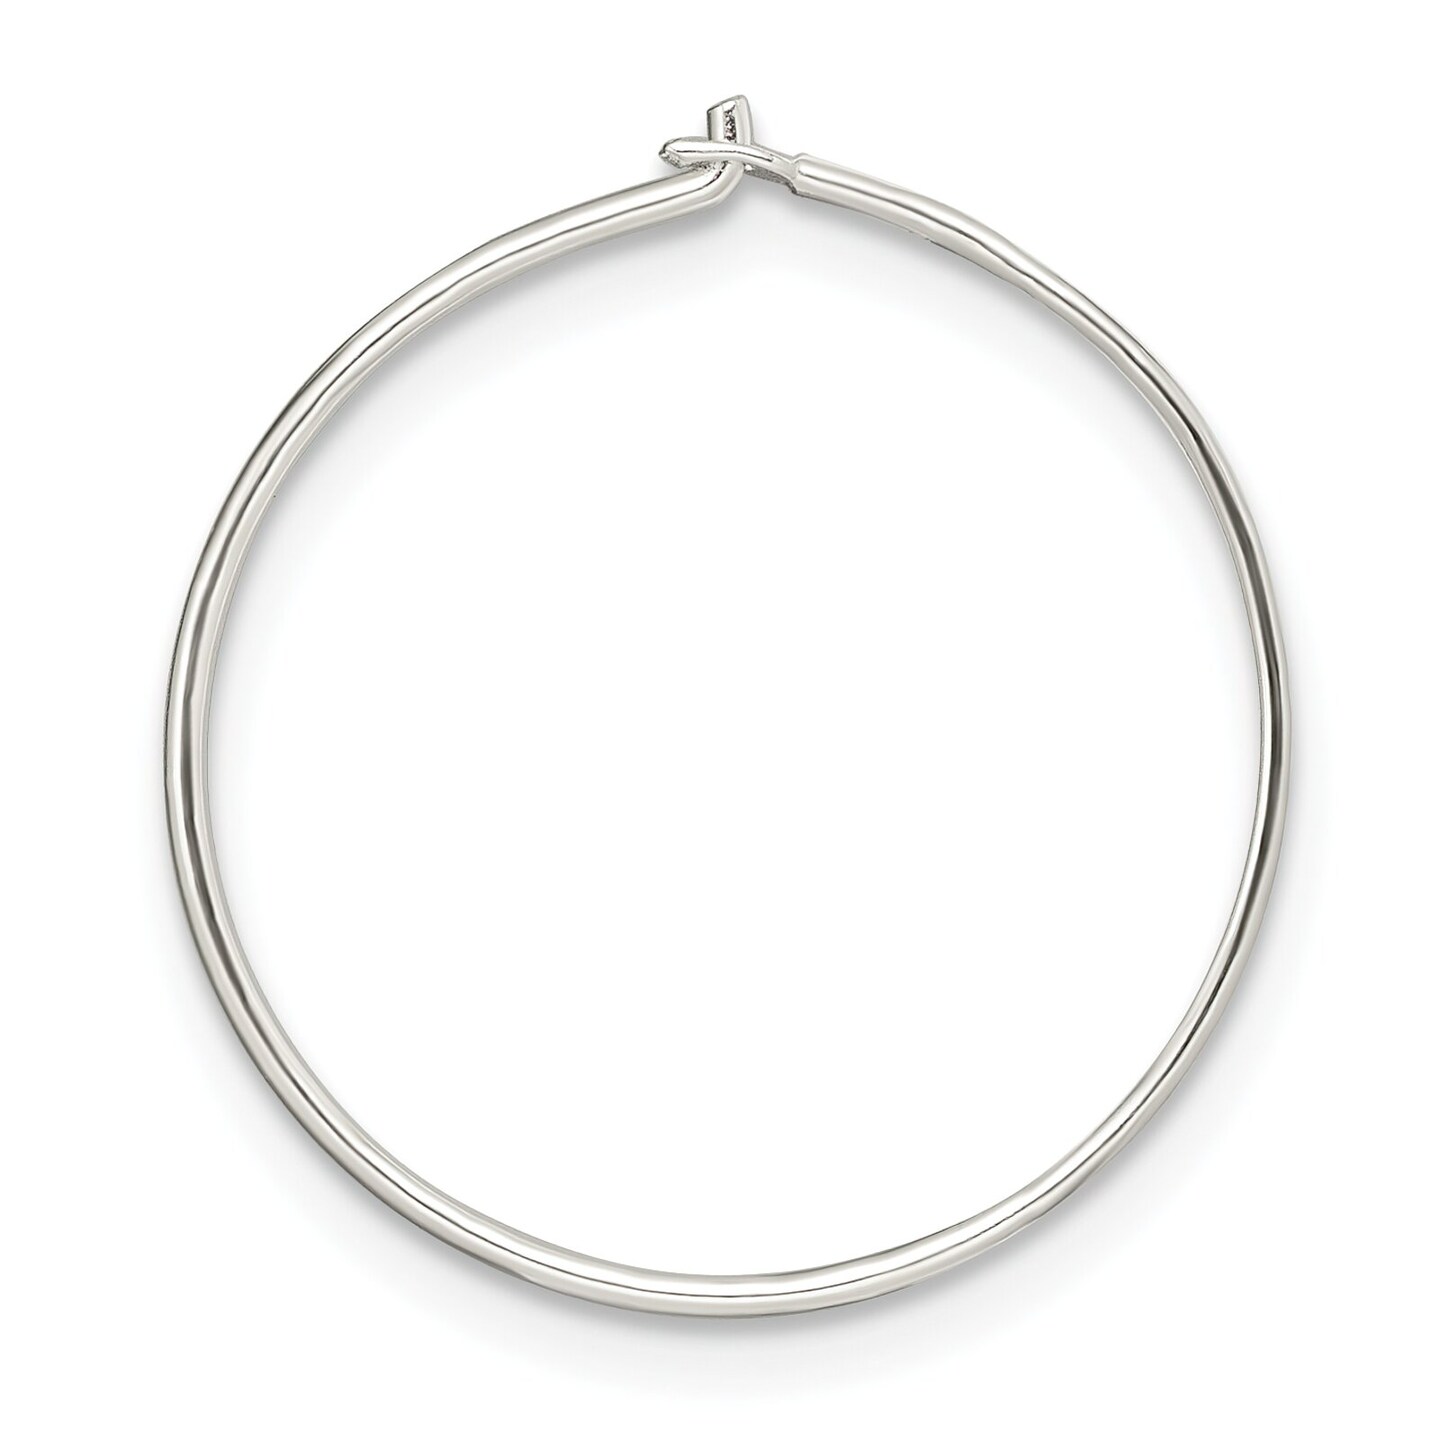 Sterling Silver Wire Hoop Earring Jewerly - Pack of 12